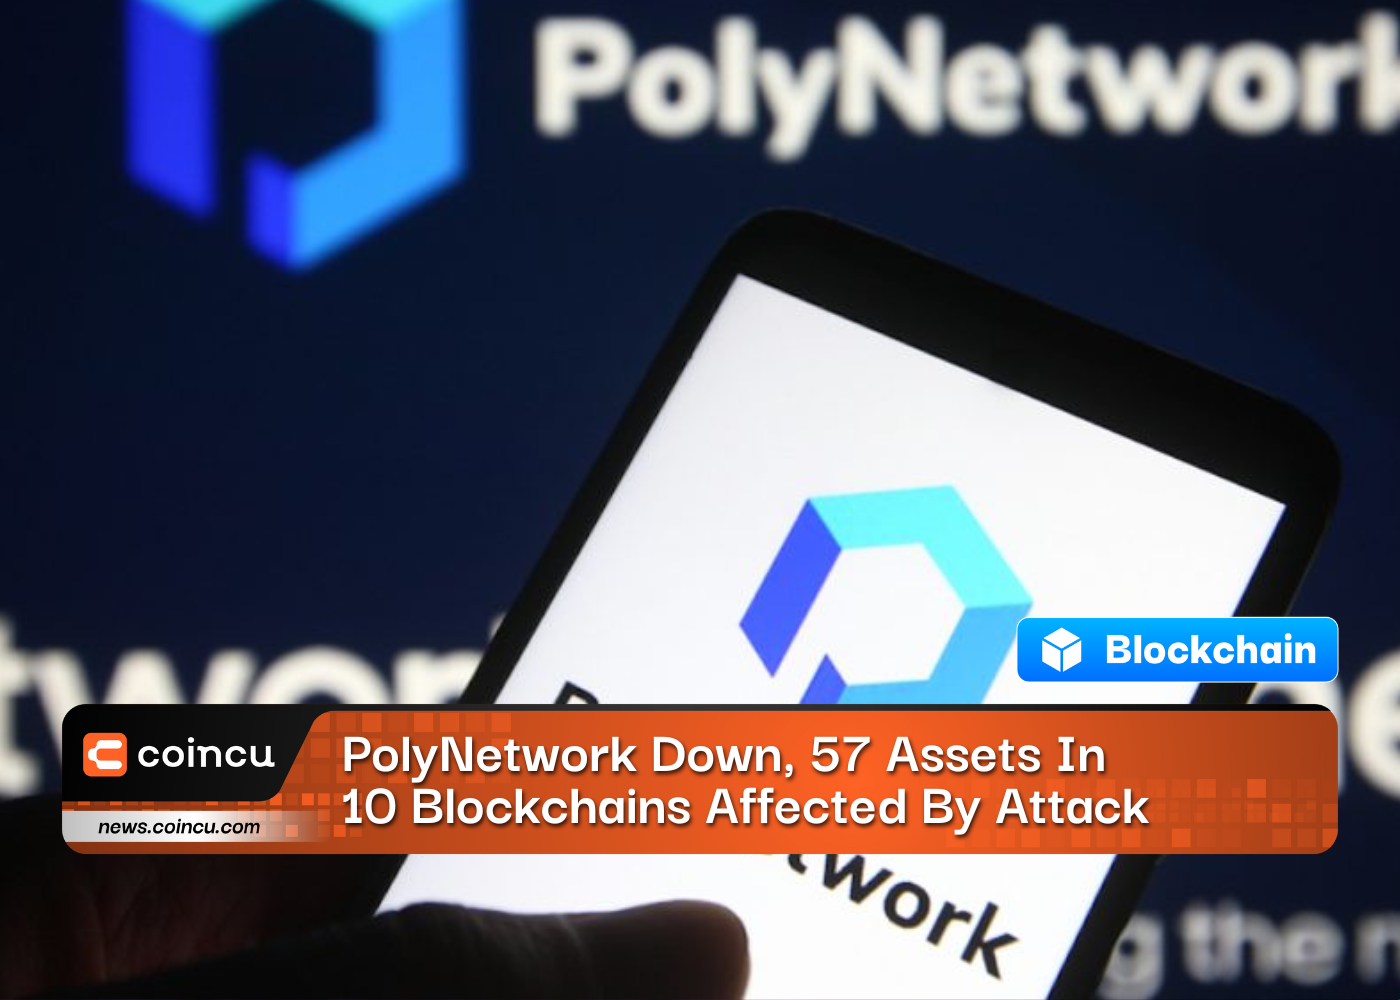 PolyNetwork Down, 57 Assets In 10 Blockchains Affected By Attack